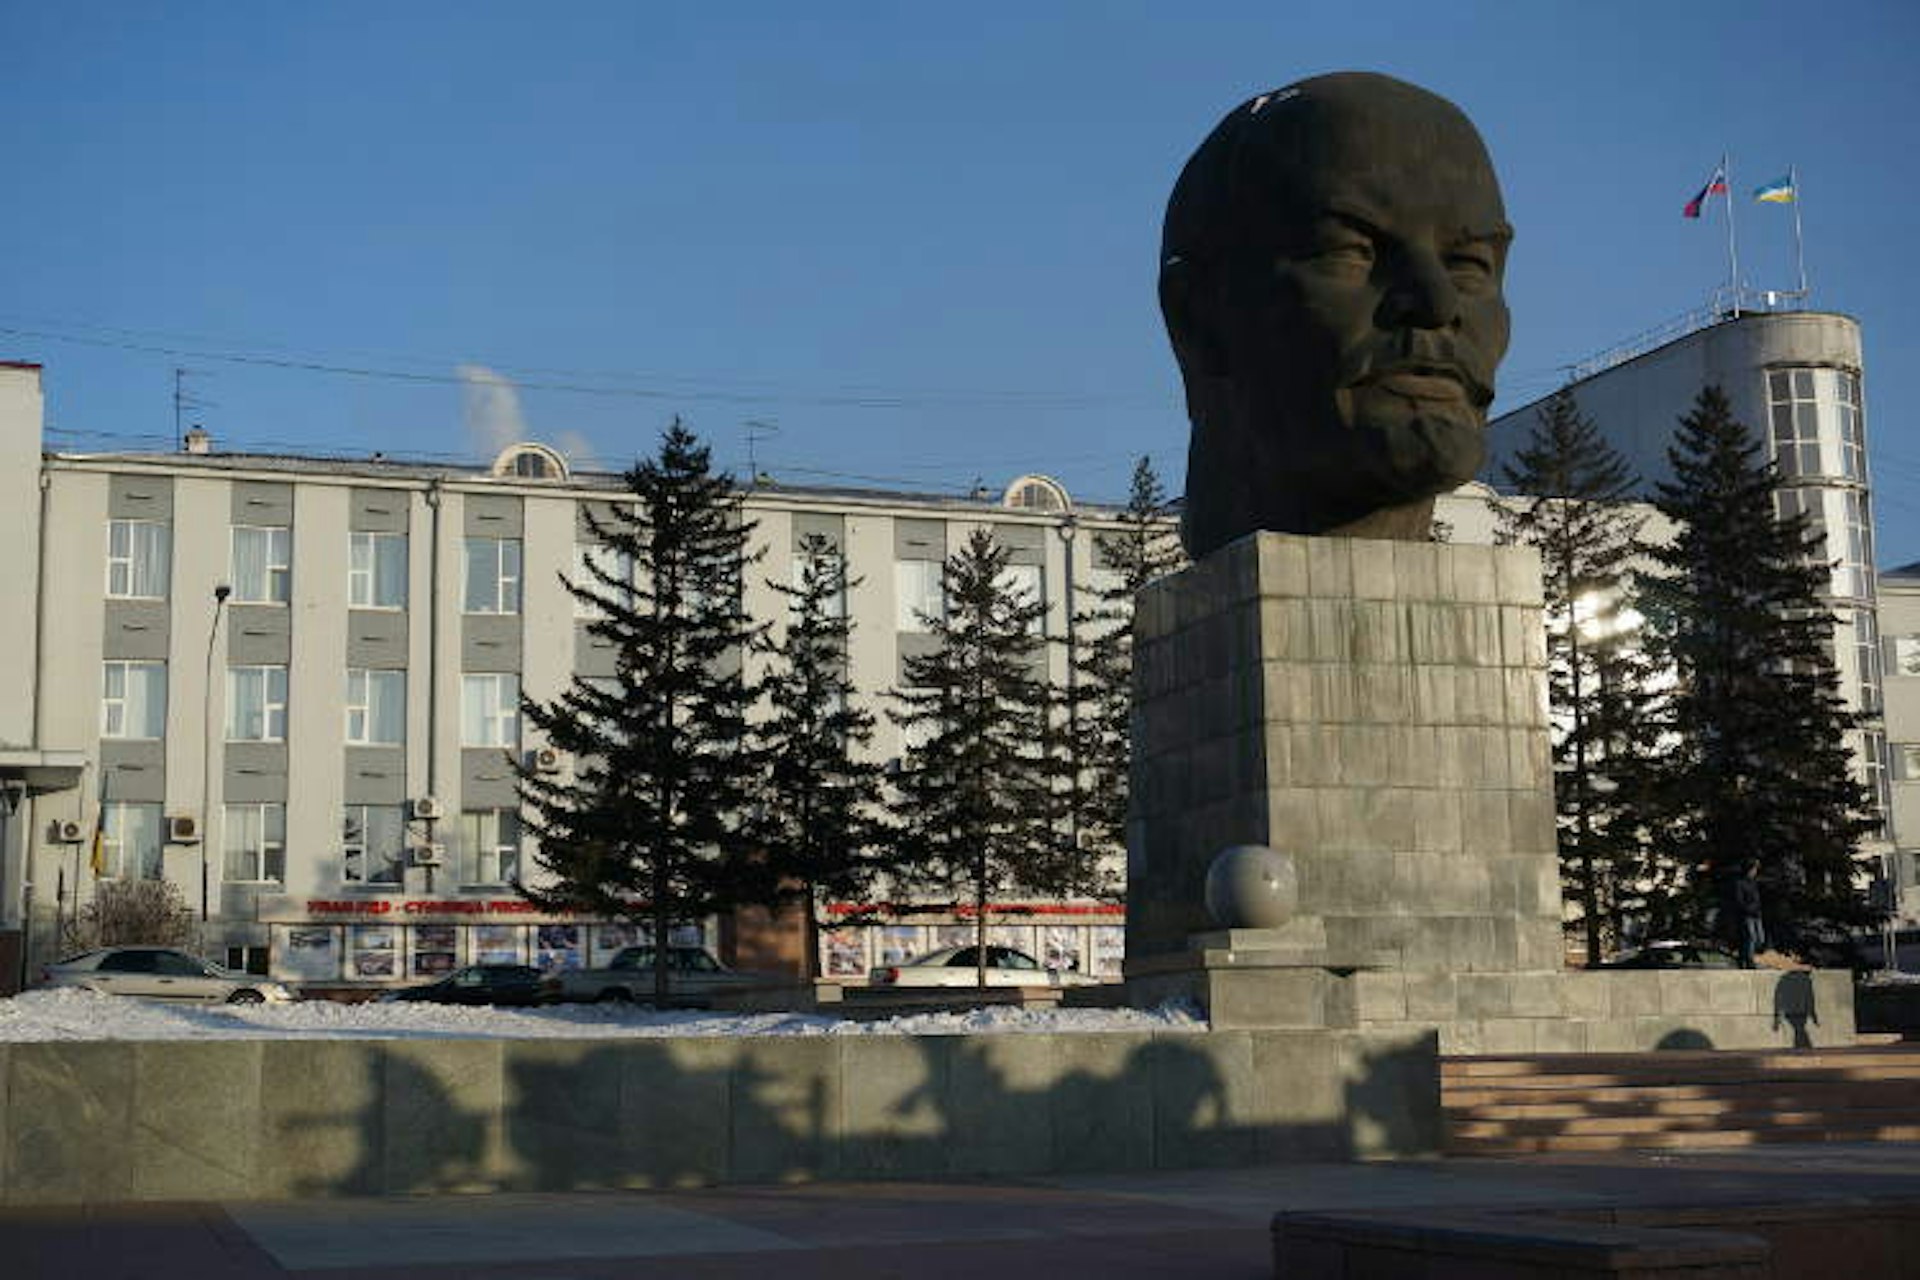 An enormous head of Lenin made of black stone stands on a plinth in the snow outside a station